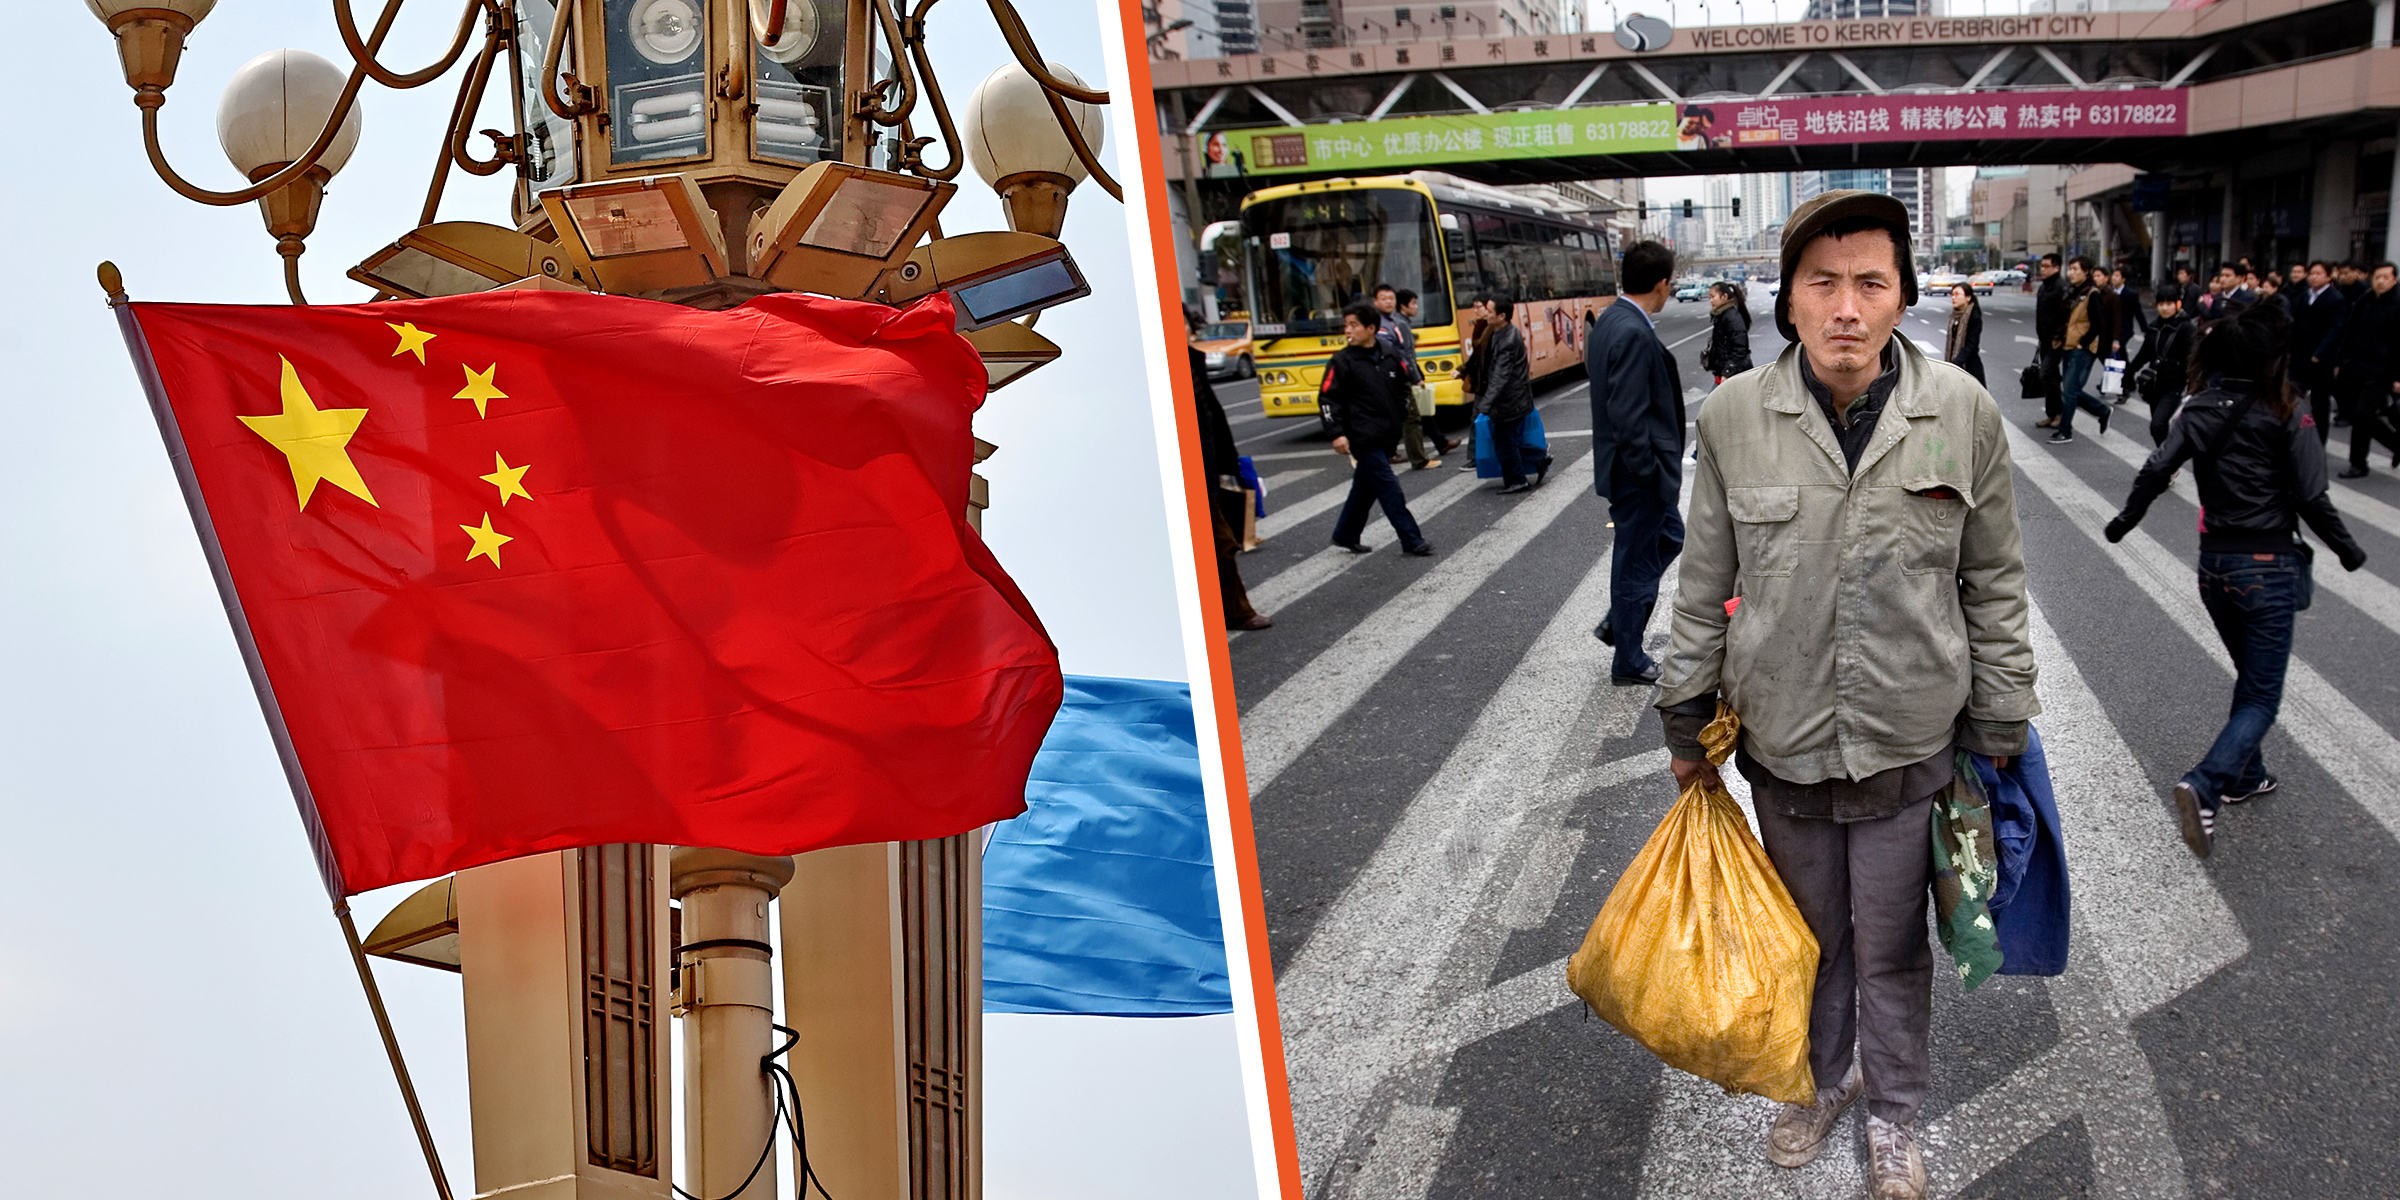 Chinese flag | Chinese people walking on the streets | Source: Getty Images